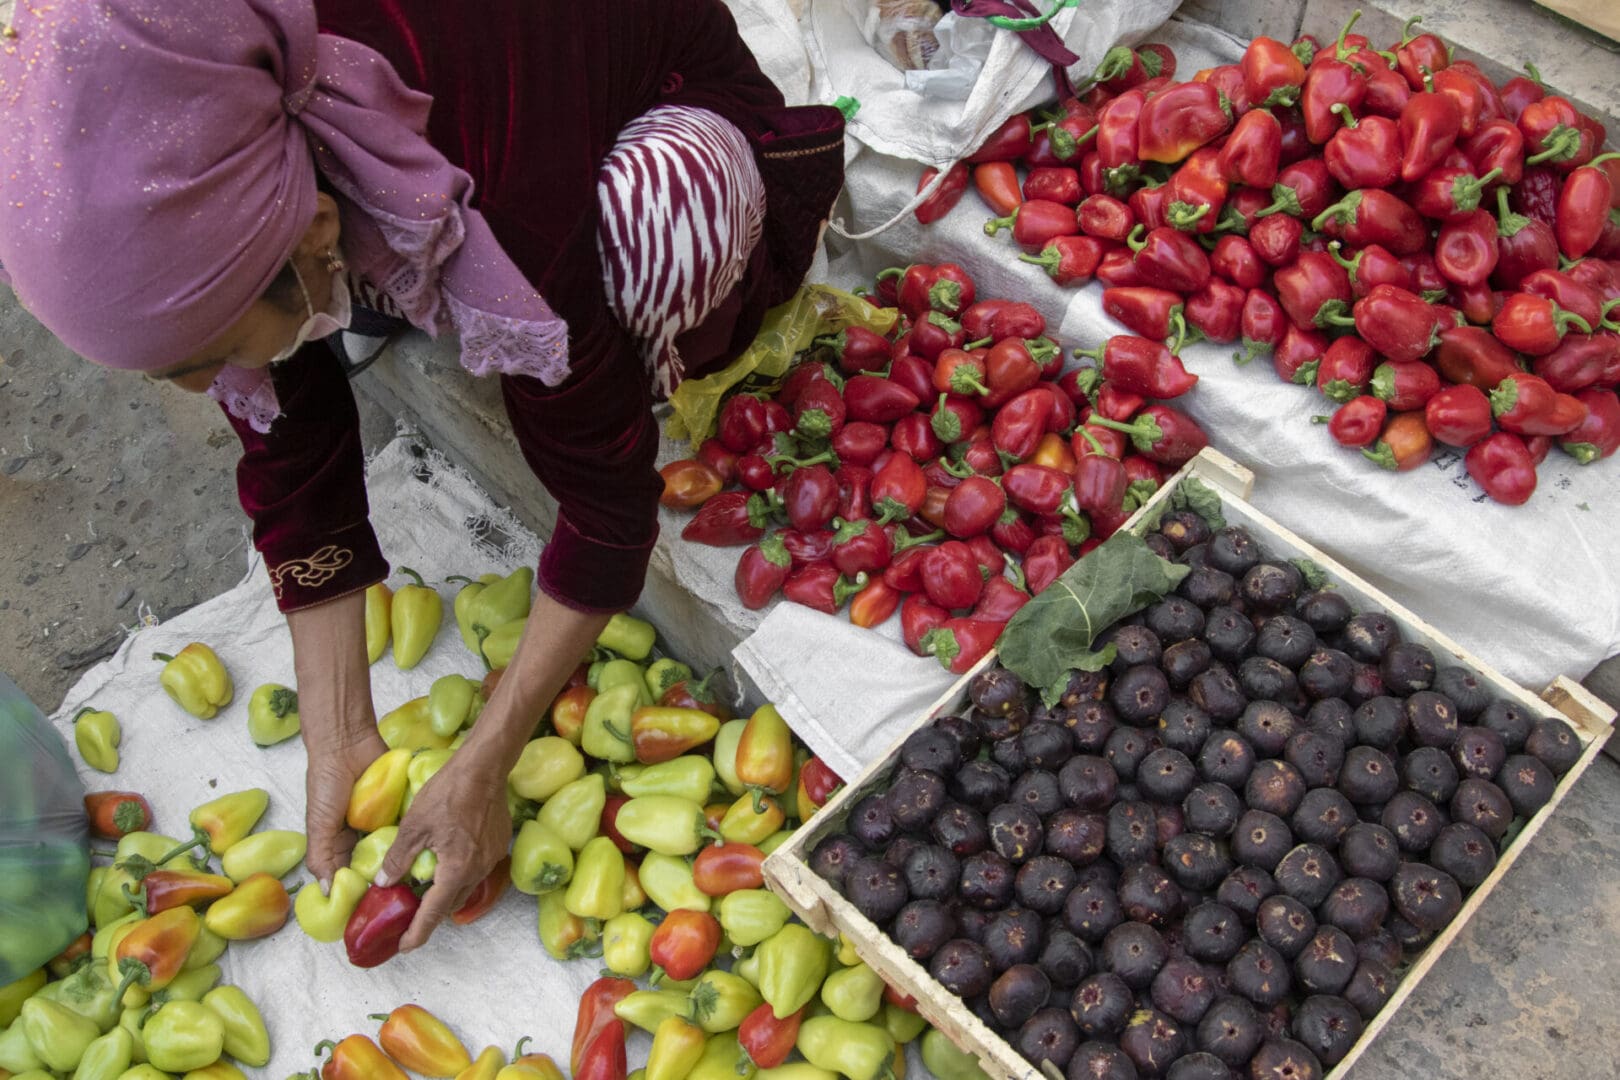 A woman is selling fruit at a market.